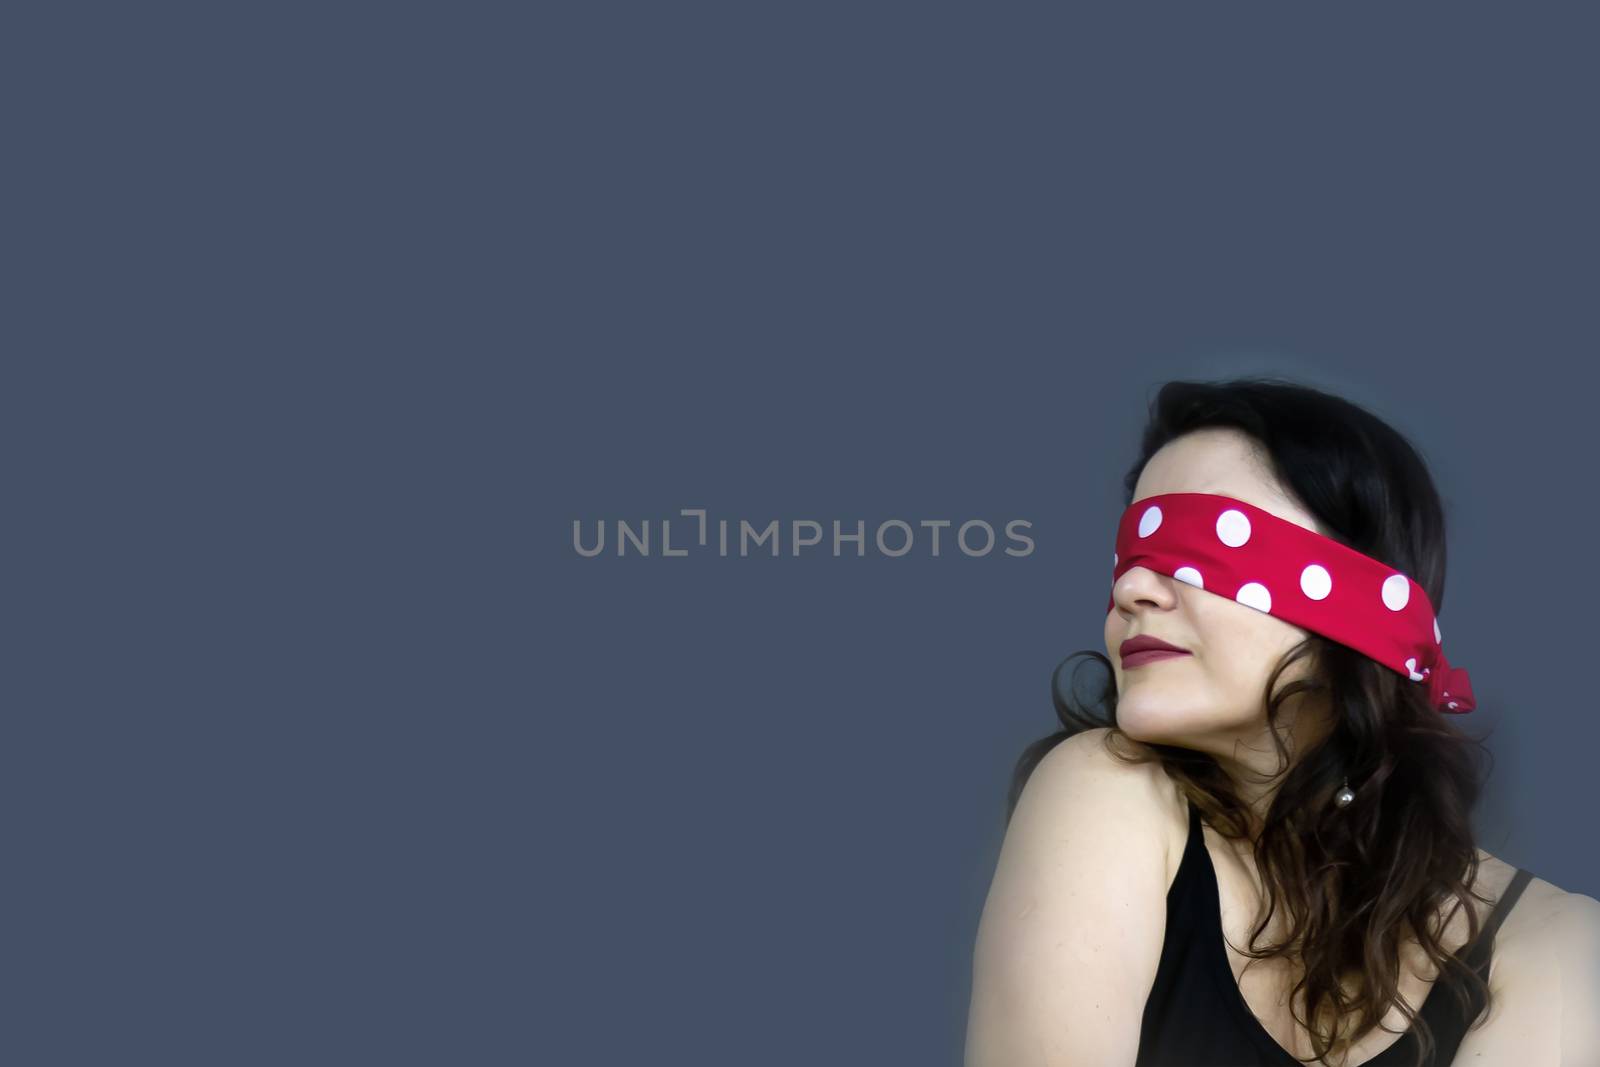 Portrait of a beautiful, fashionable middle-aged woman with long dark hair and a red blindfold covering her eyes, posing against a dark gray background. Free space to copy your design.